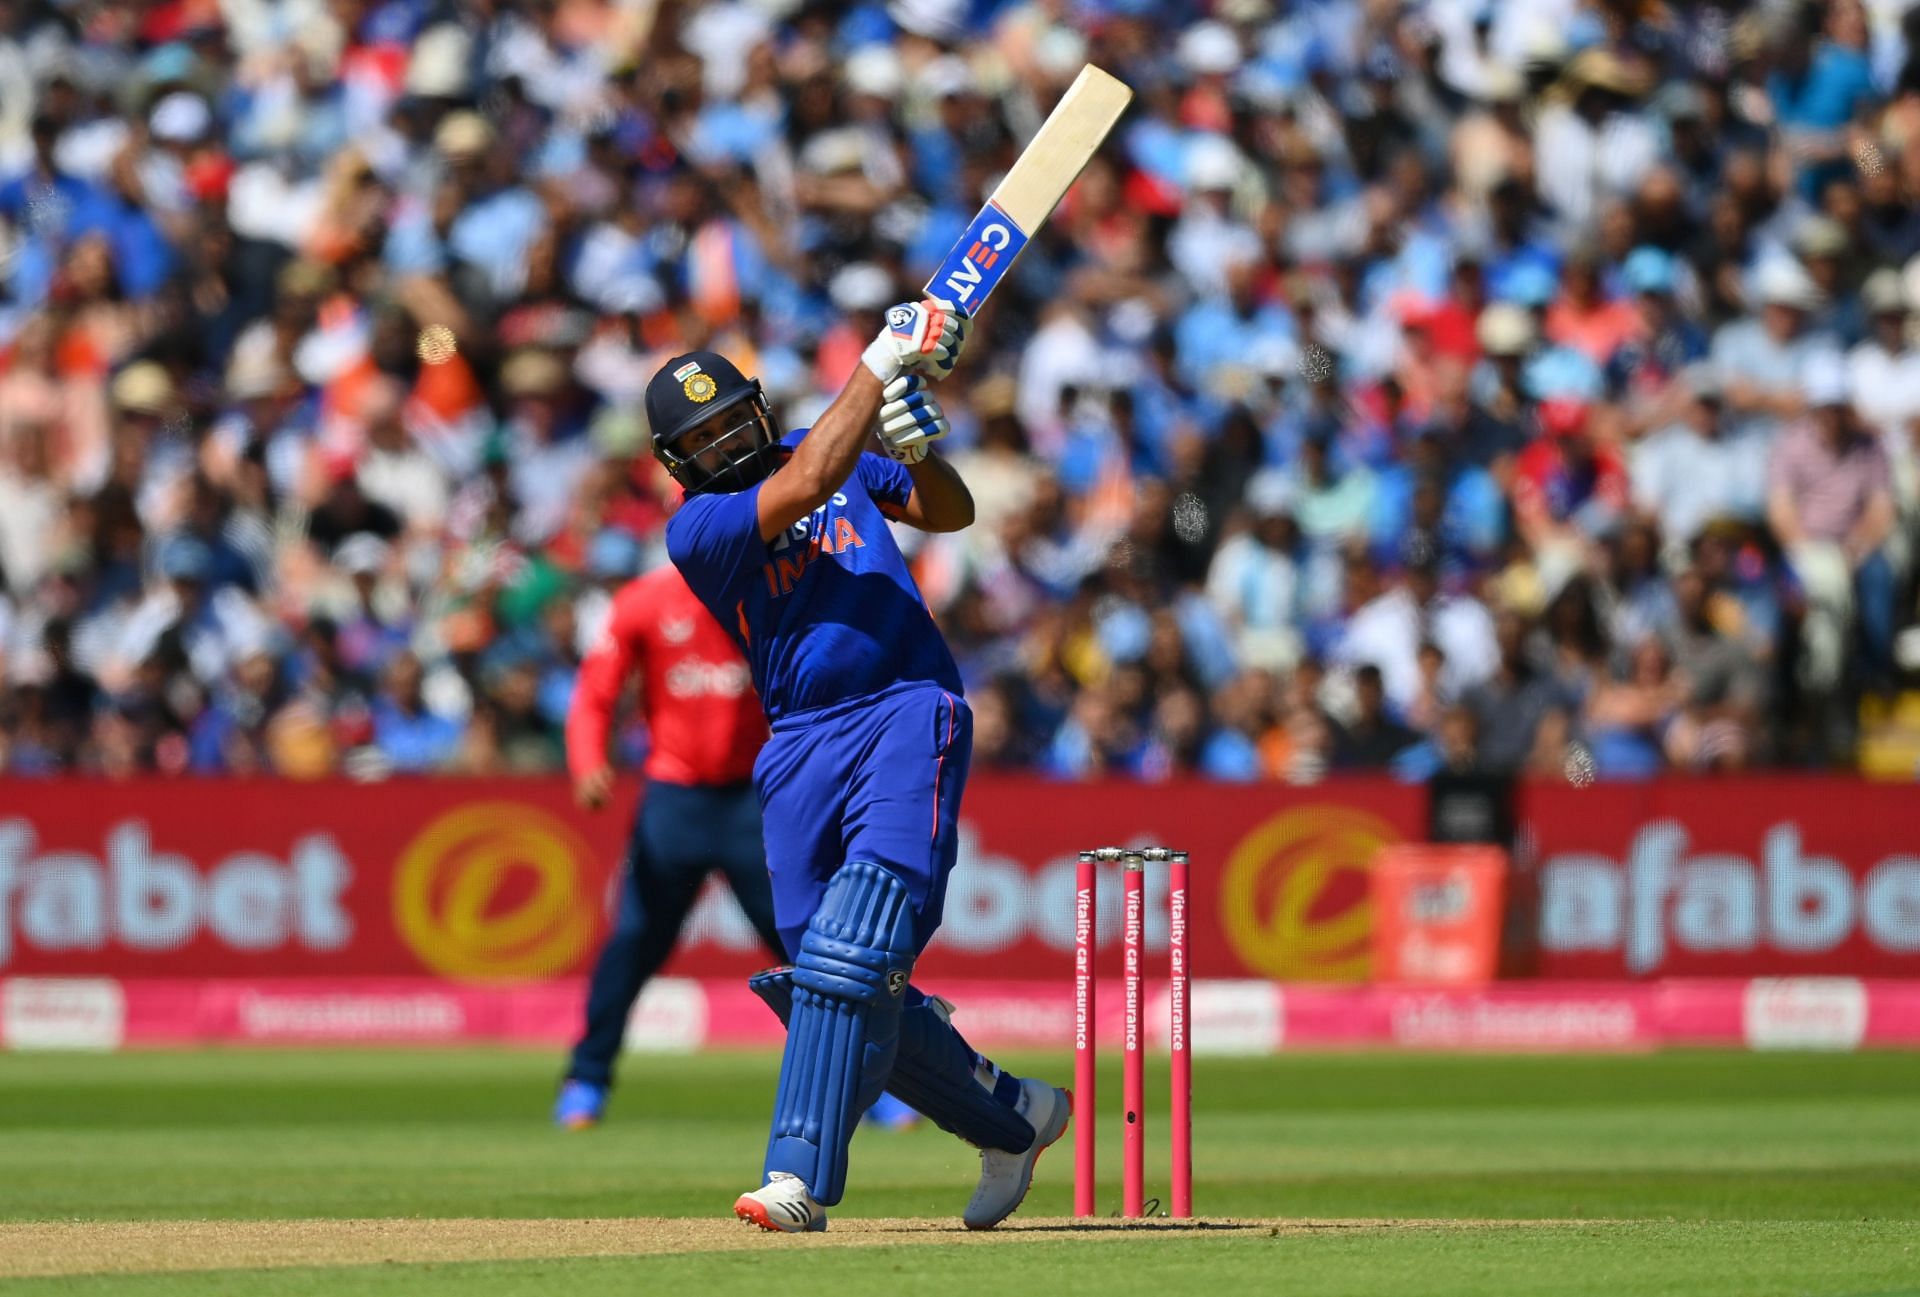 Rohit Sharma looked in decent touch in the T20I series against England